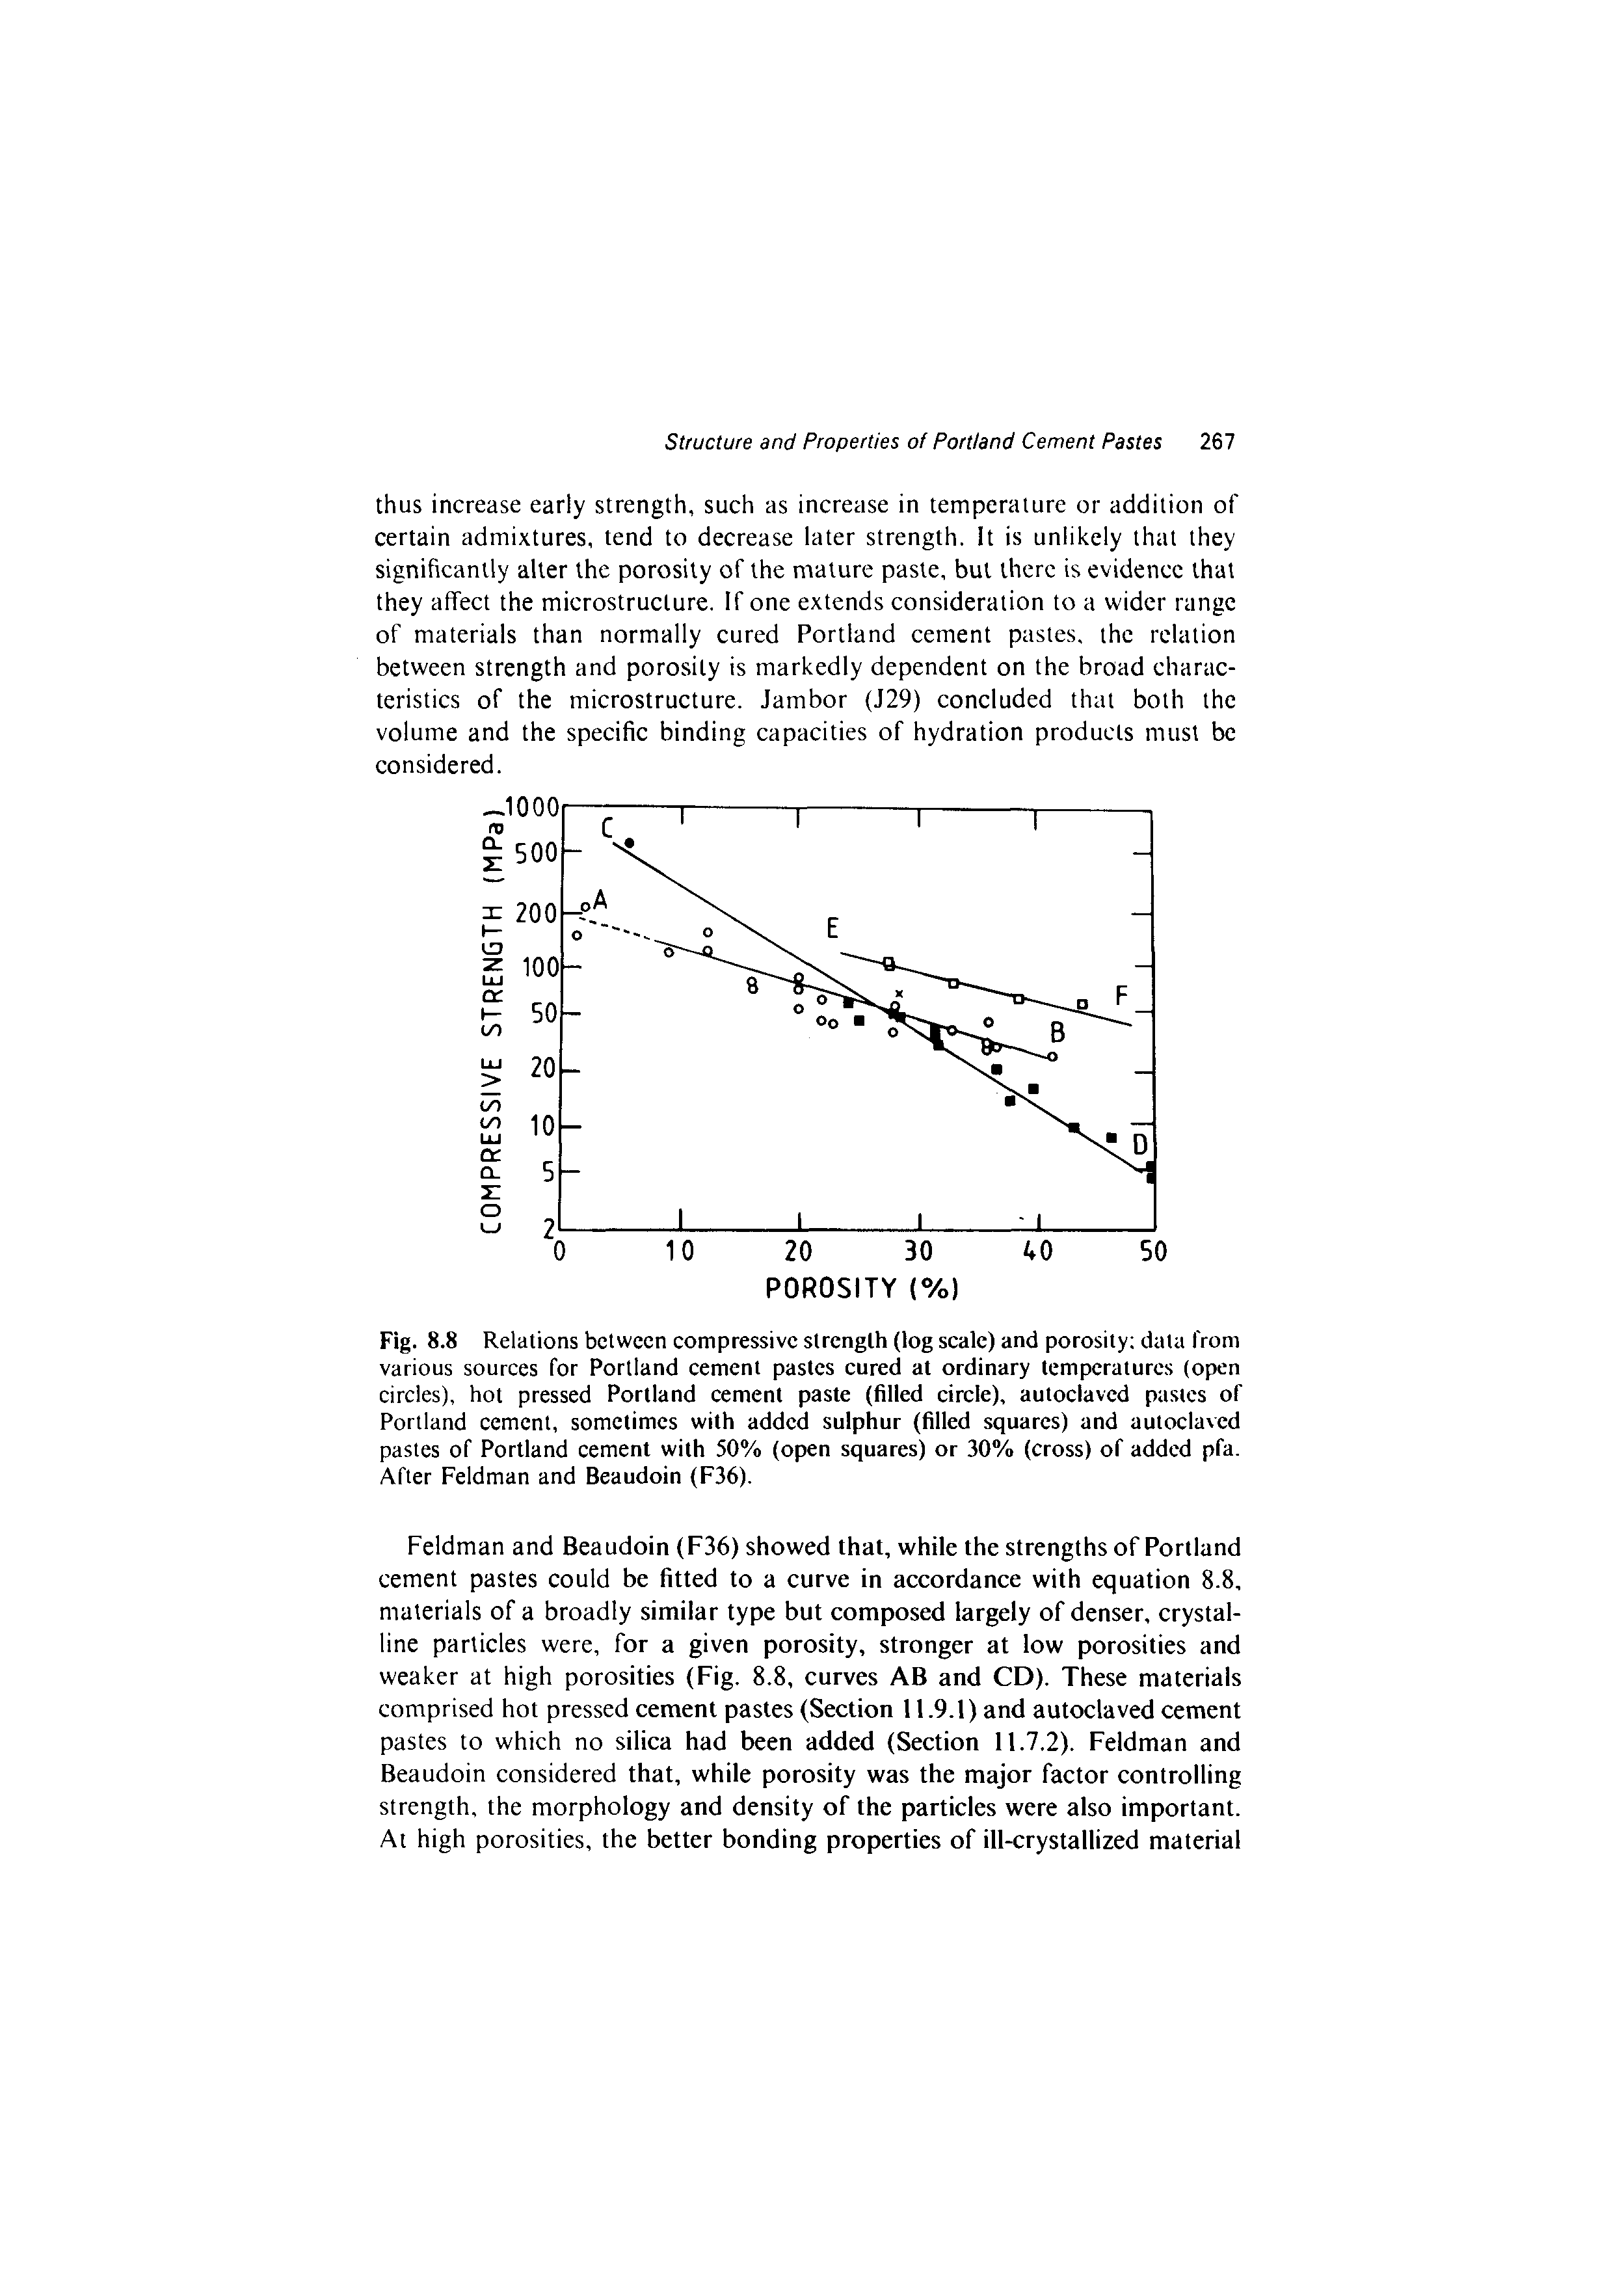 Fig. 8.8 Relations between compressive strength (log scale) and porosity data from various sources for Portland cement pastes cured at ordinary temperatures (open circles), hot pressed Portland cement paste (filled circle), autoclaved pastes of Portland cement, sometimes with added sulphur (filled squares) and autoclaved pastes of Portland cement with 50% (open squares) or 30"/o (cross) of added pfa. After Feldman and Beaudoin (F36).